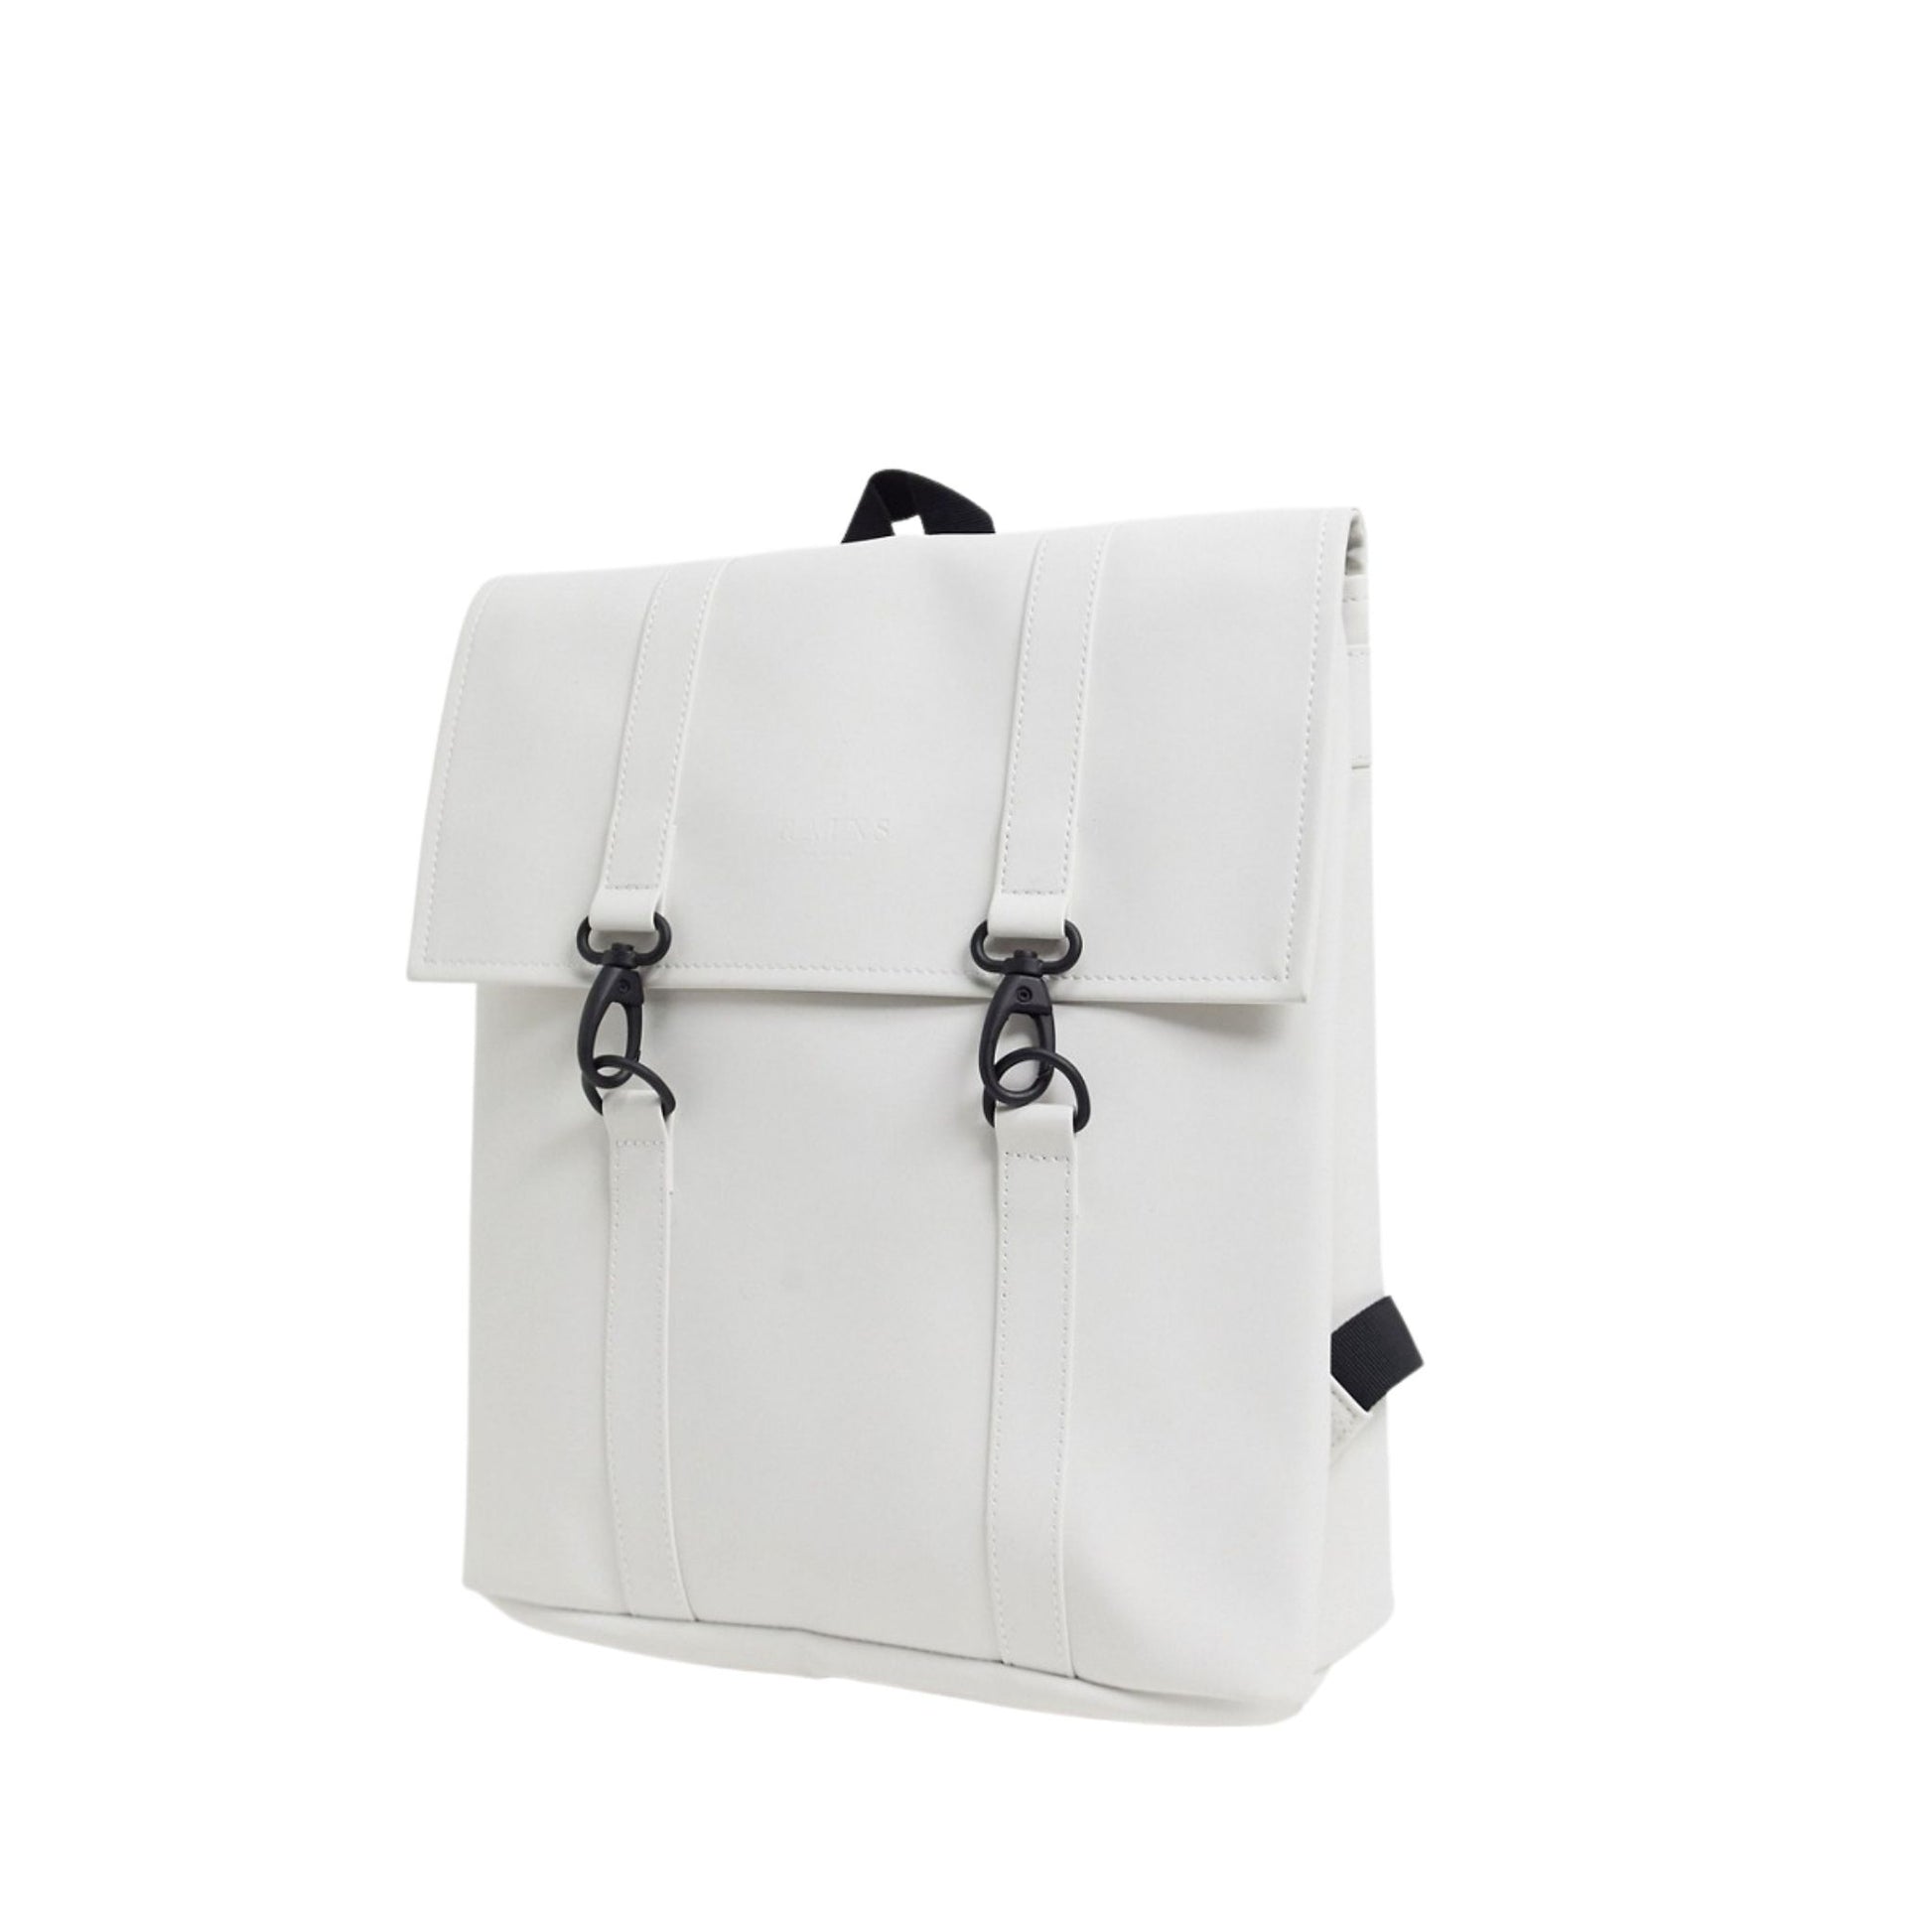 Rains waterproof backpack MSN bag off white for men and women front and side view